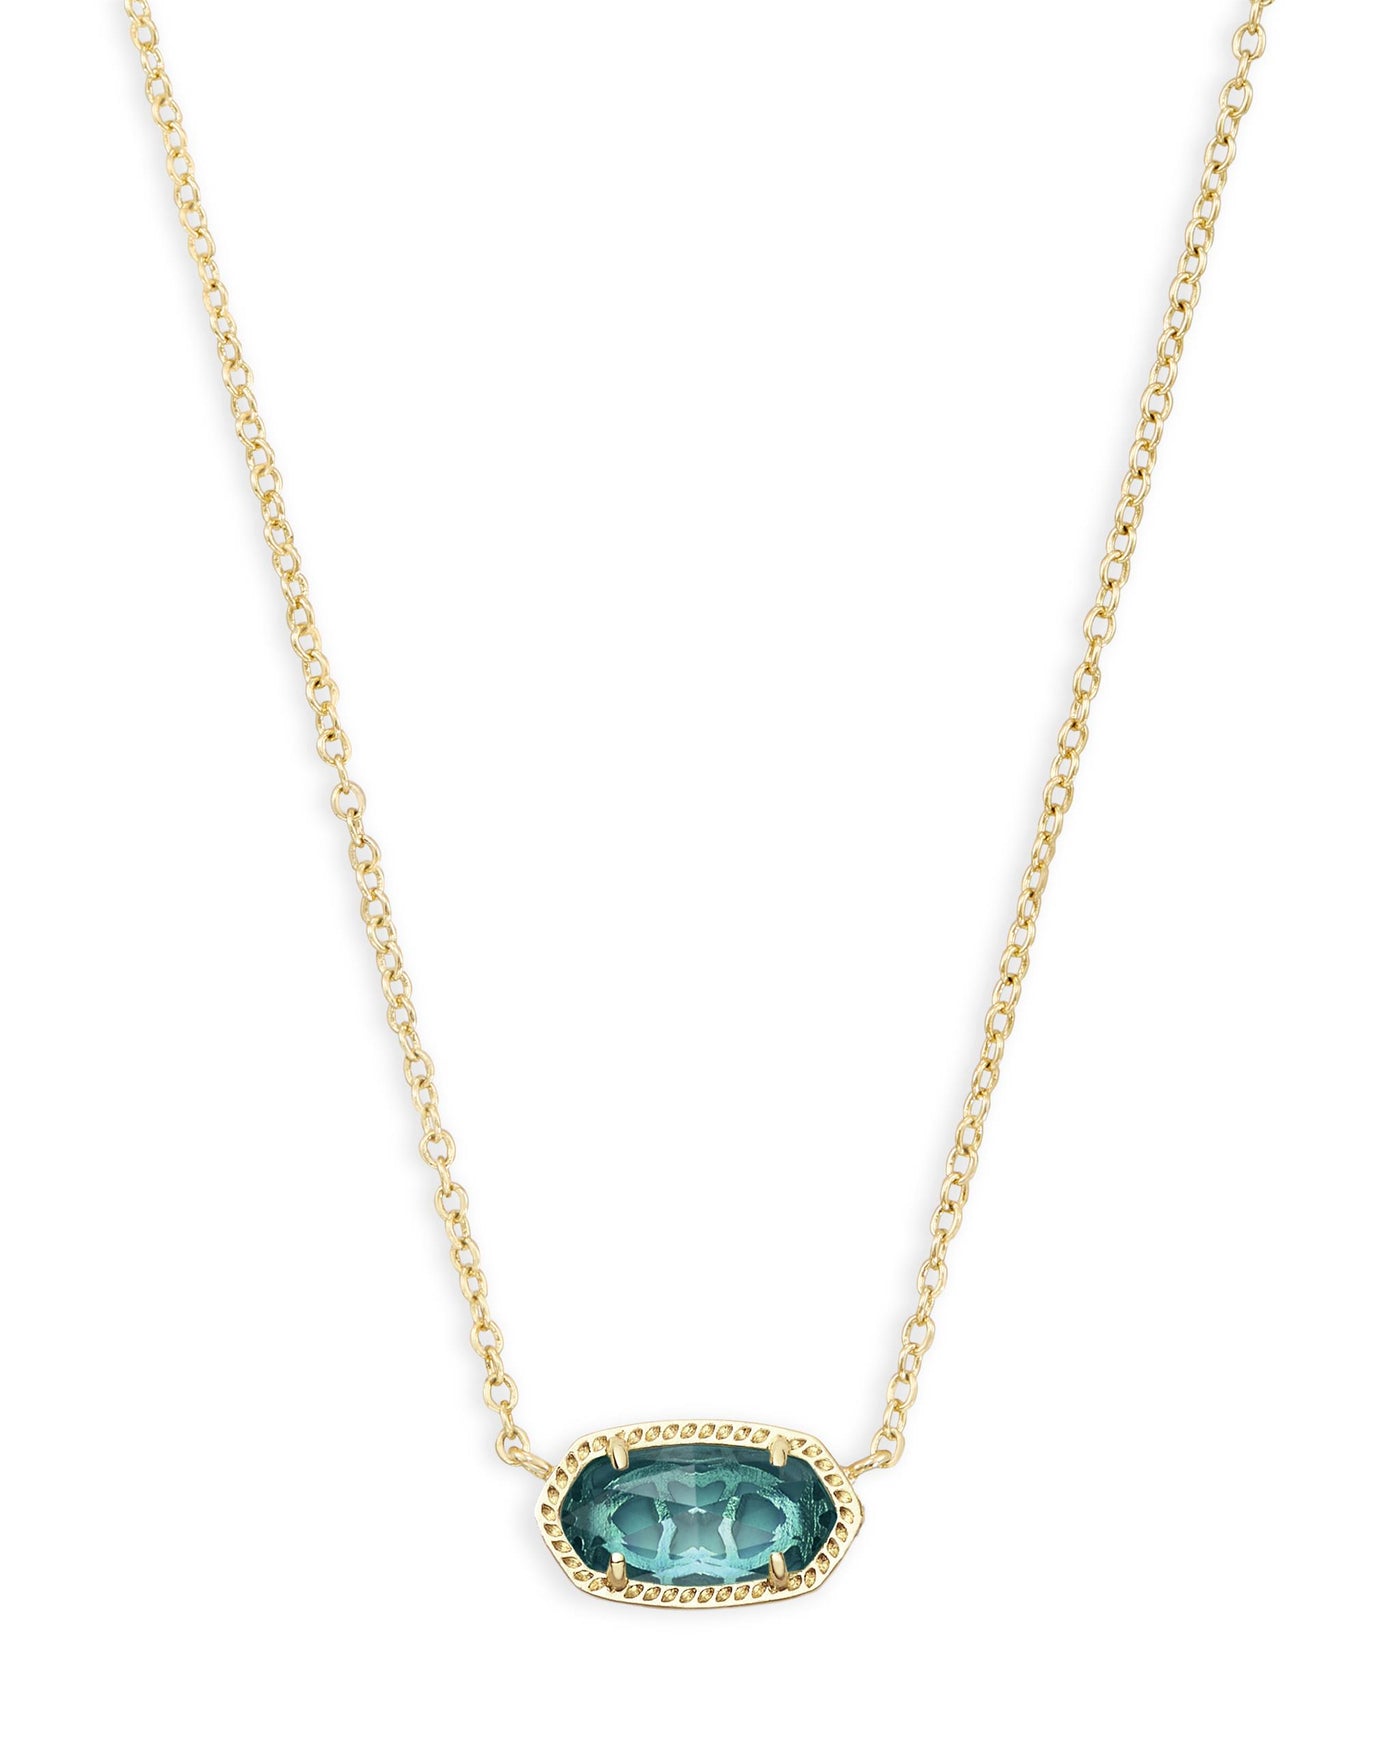 Gold Tone Necklace Featuring London Blue Dichroic Glass by Kendra Scott